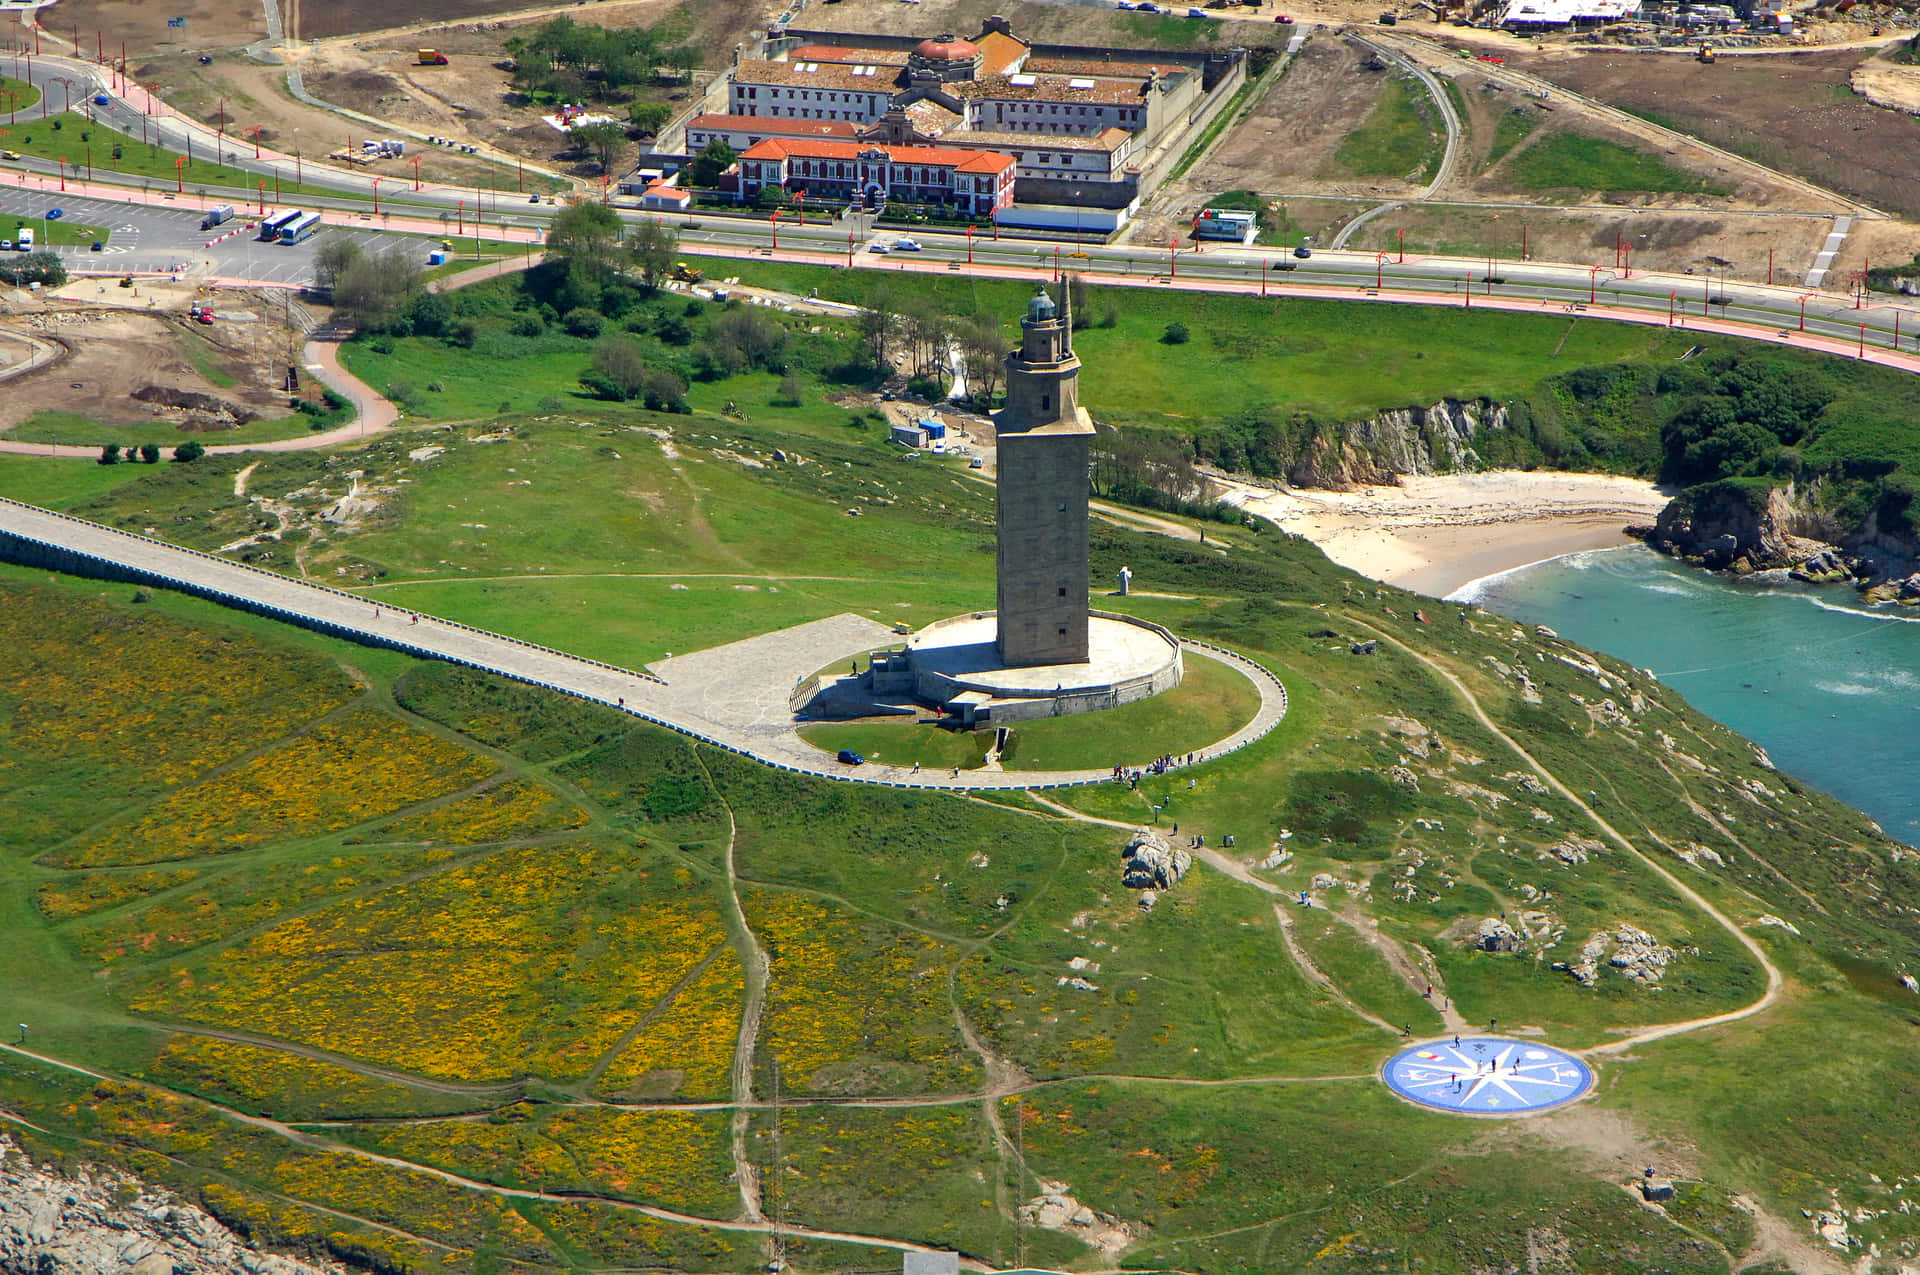 Aerial View of the Majestic Tower of Hercules Surrounded by Lush Green Grass Wallpaper